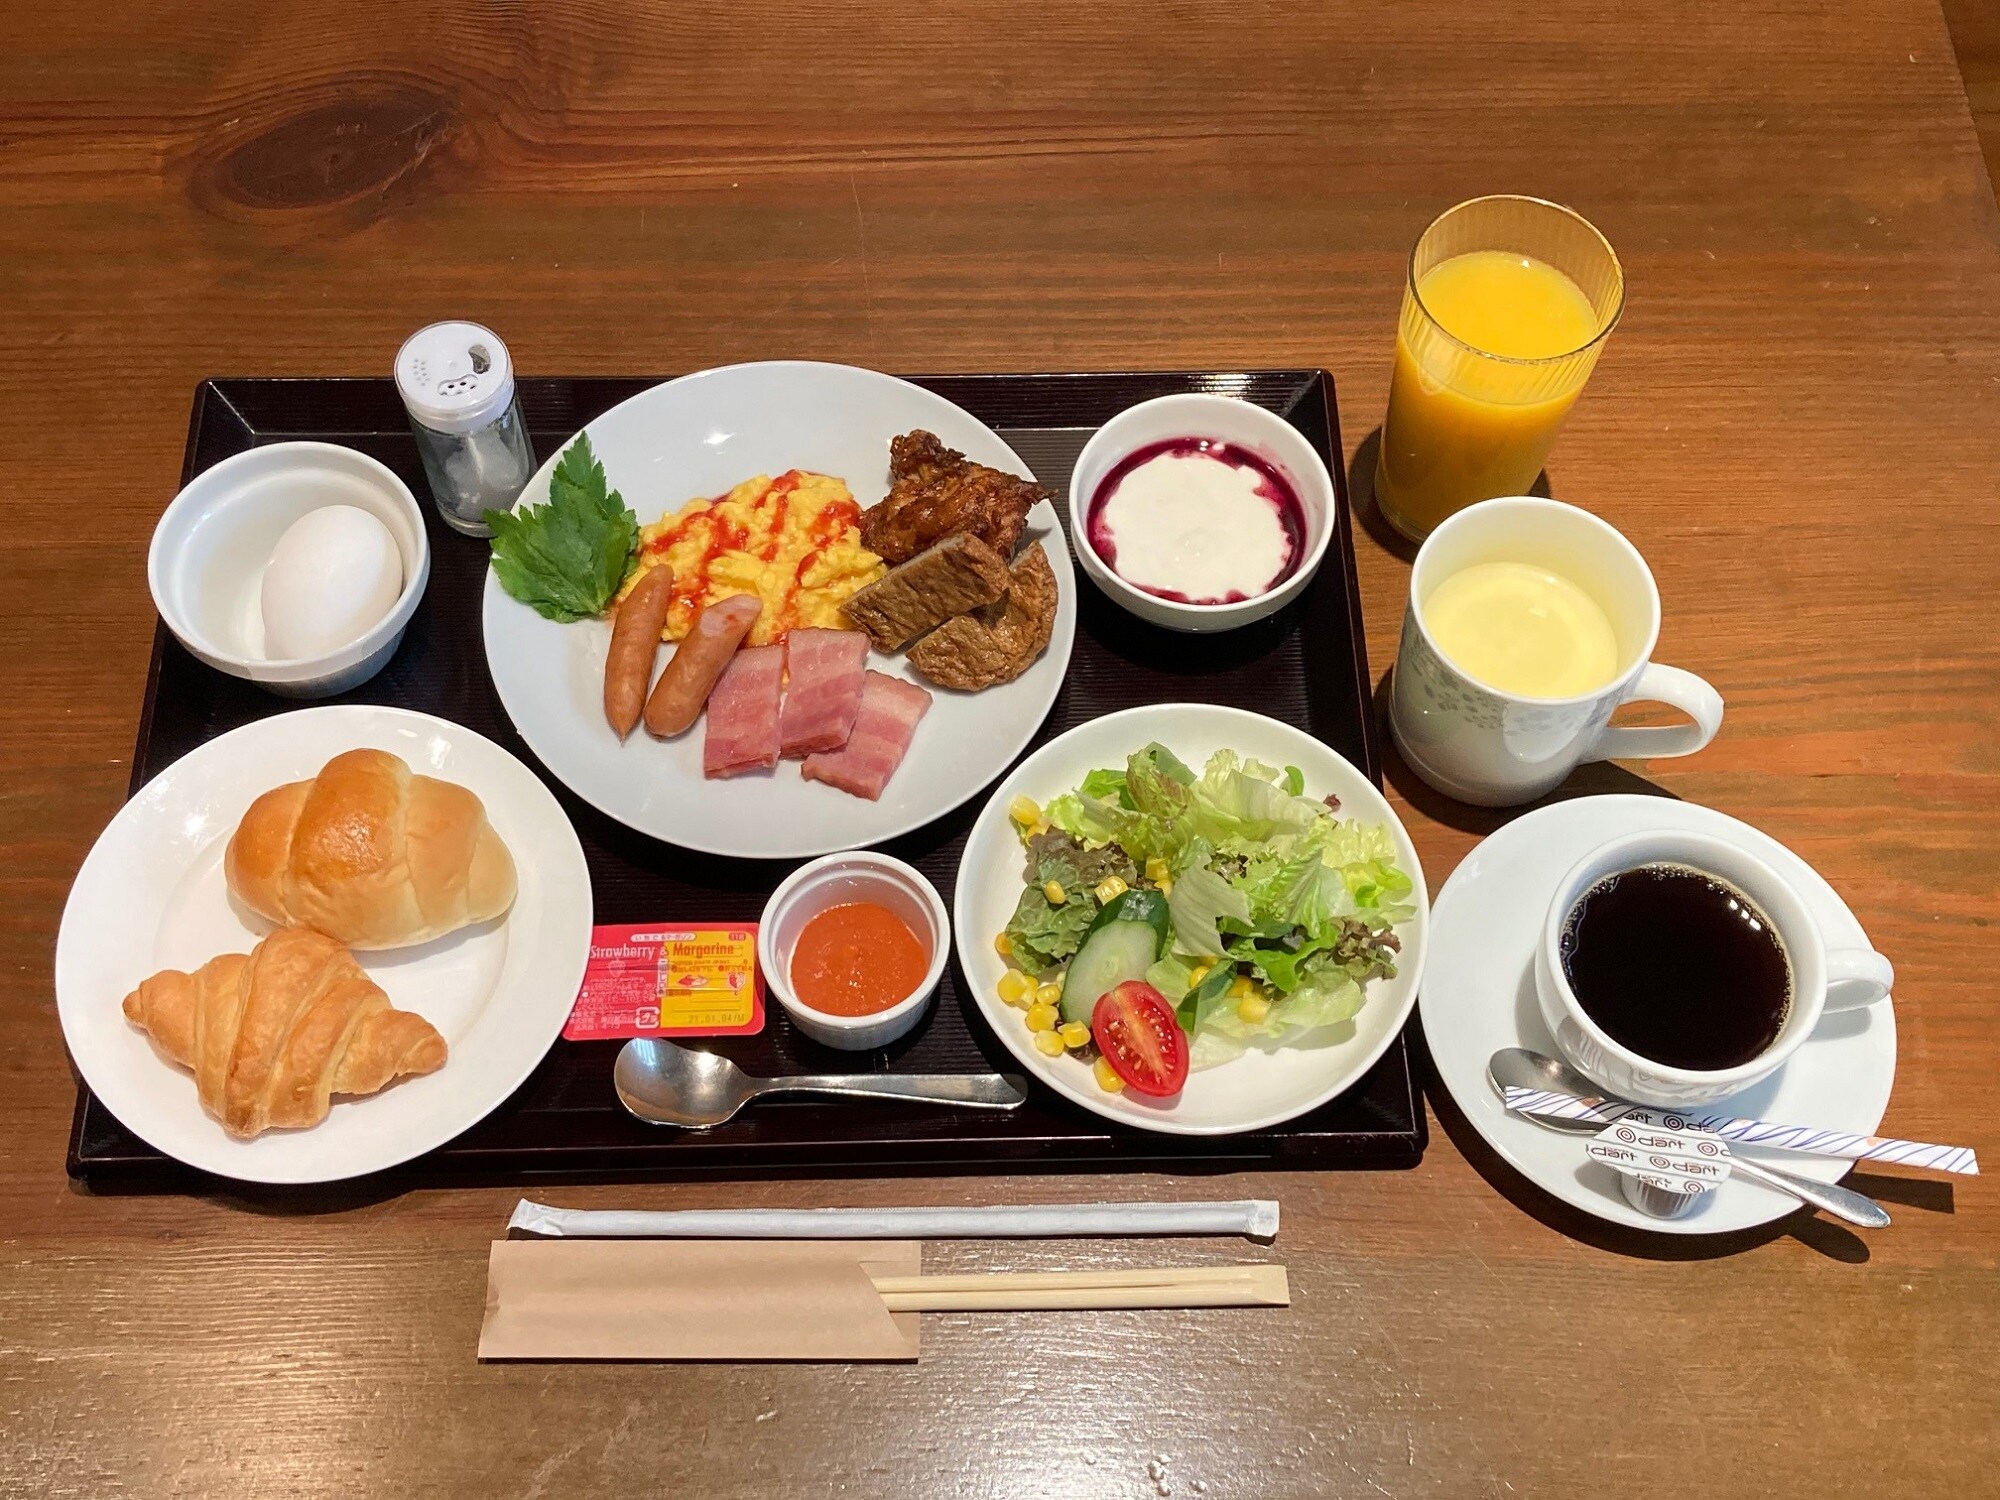 "Western set meal" Currently, the breakfast format is changing. You can choose Japanese or Western at check-in.